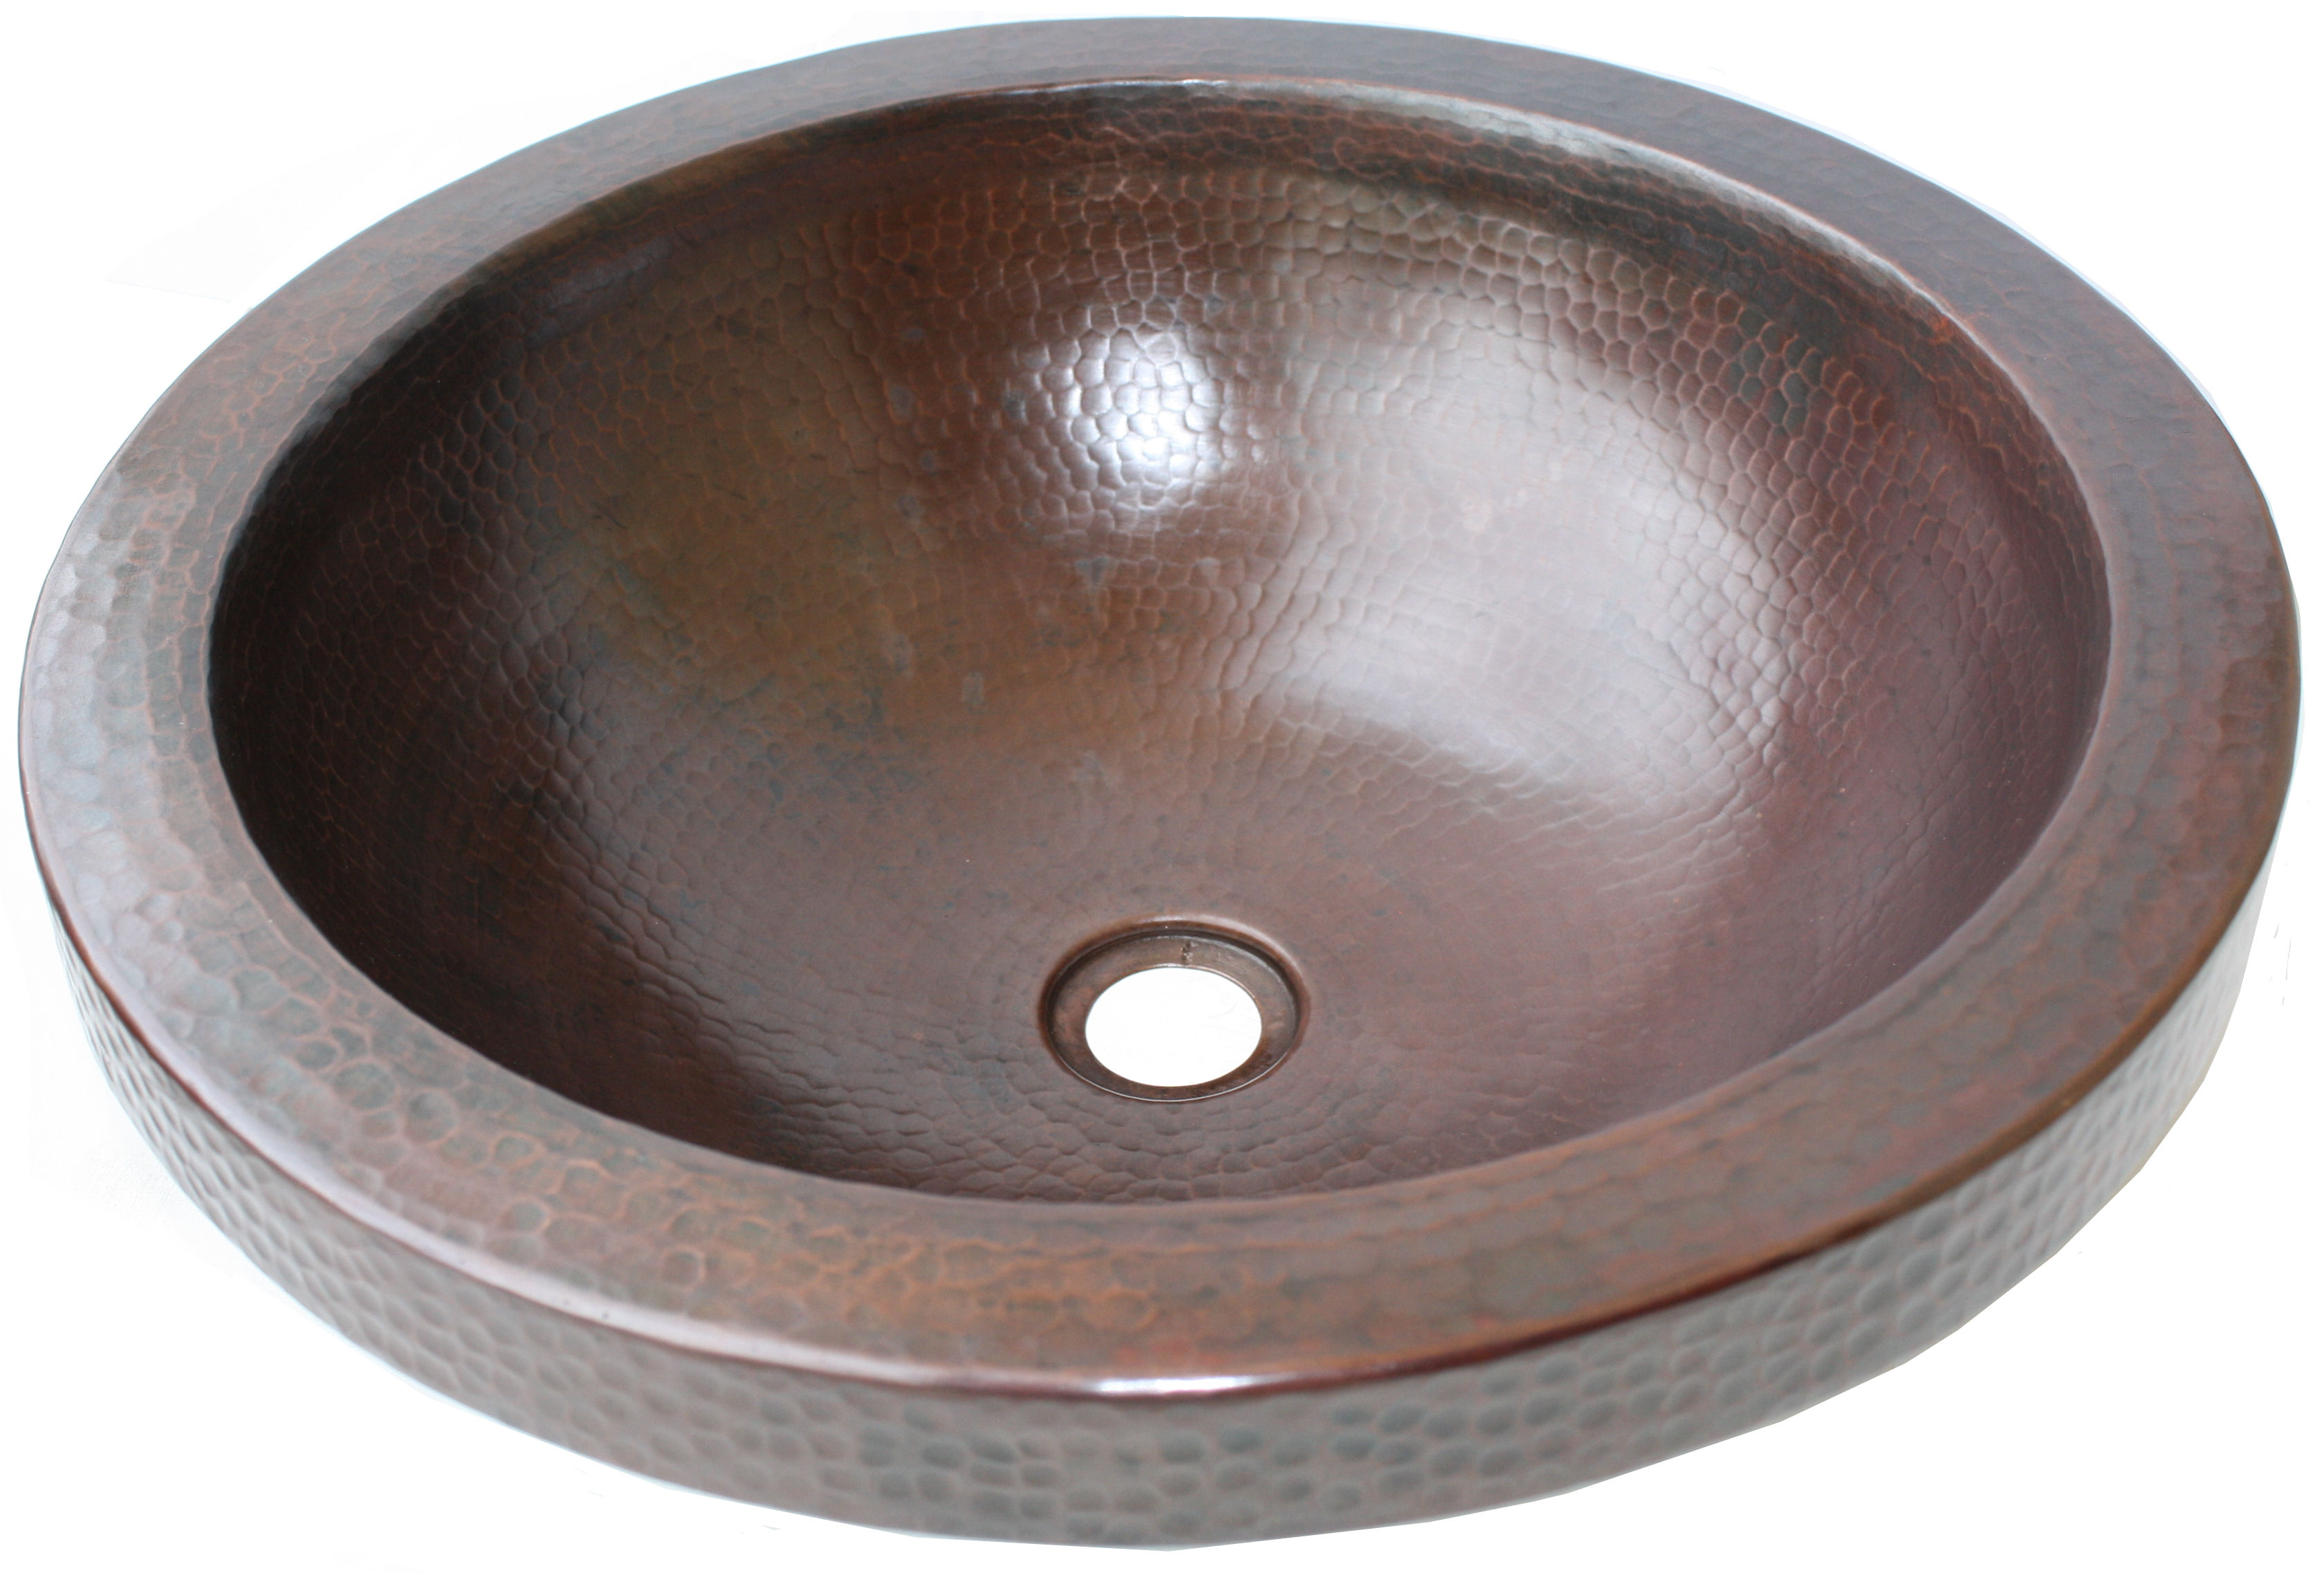 Small Apron Round Hammered Bathroom Copper Sink